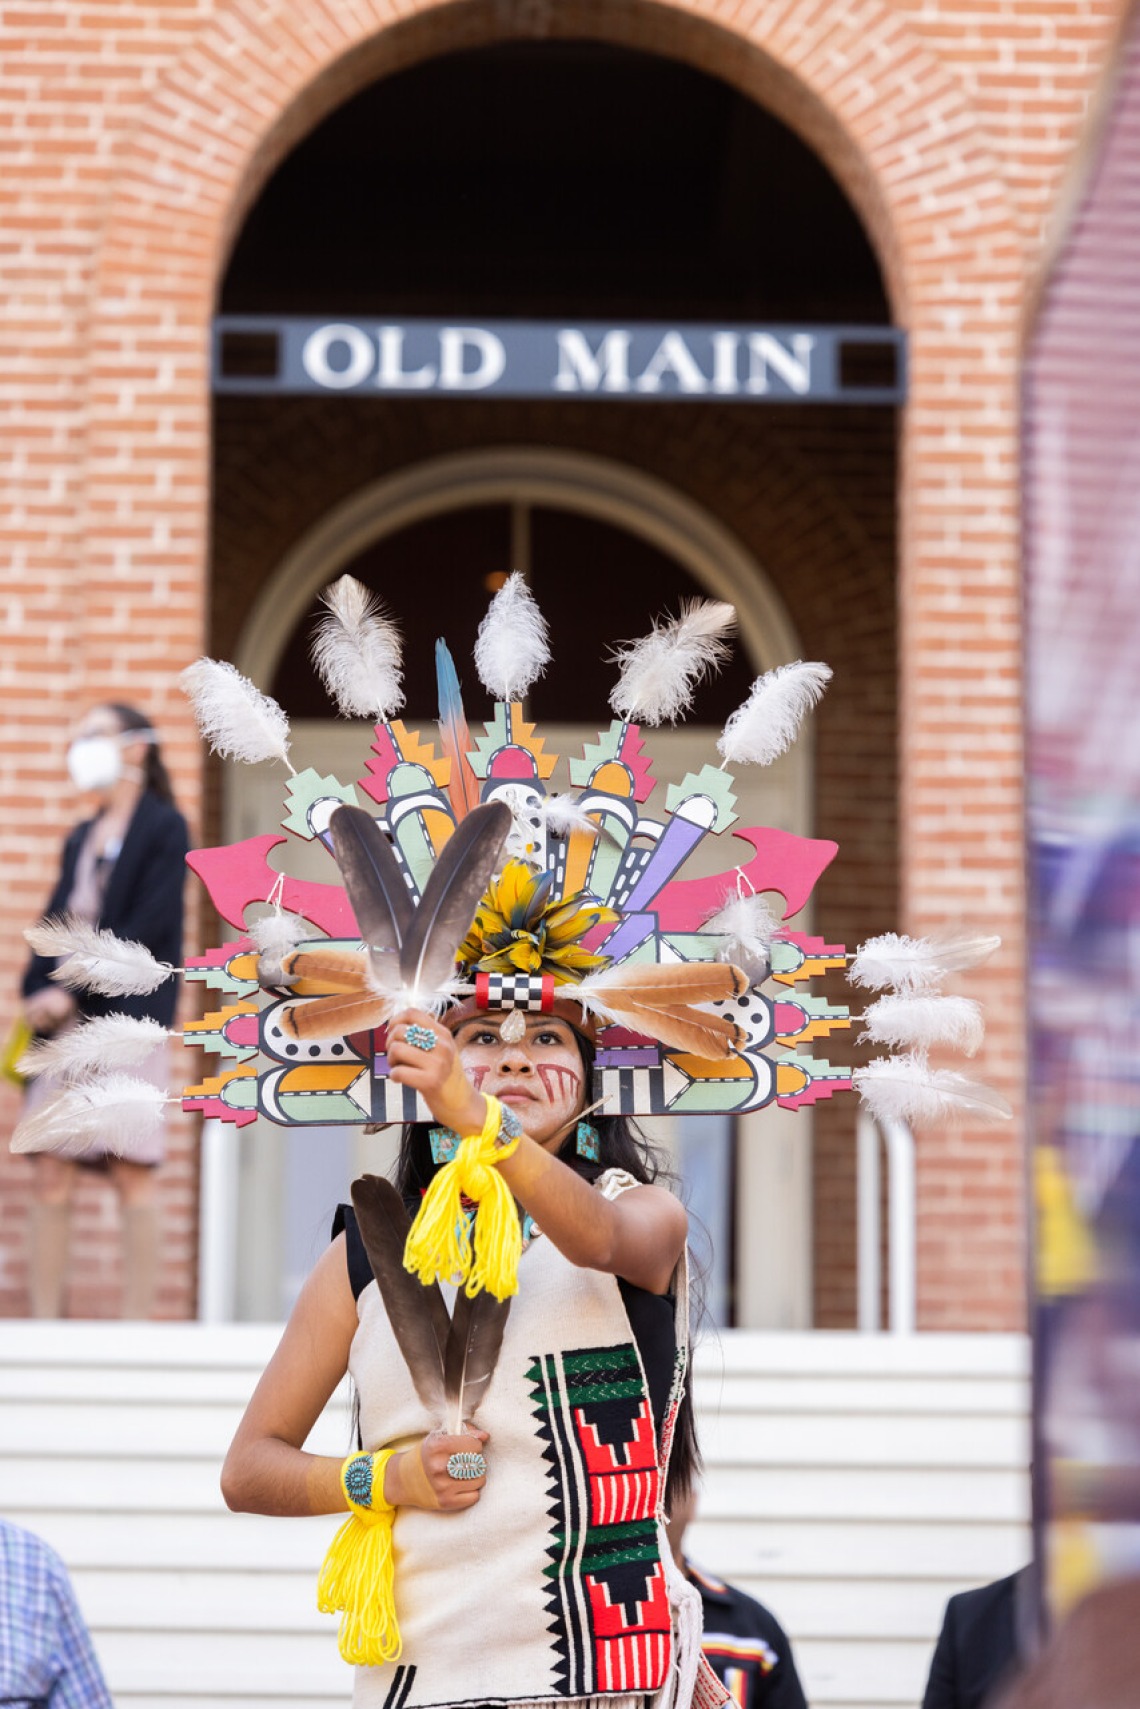 Edith Silas, a Hopi tribal member and the 2022-23 Lori Piestewa Post 80 Princess, performs a ceremonial dance during the unveiling ceremony for a new sign at Old Main in April. The sign describes Old Main as a gathering place in the Hopi language, reading: “Kiisonvi: The focal point of a community where thoughts and prayers become one to benefit all life.” 